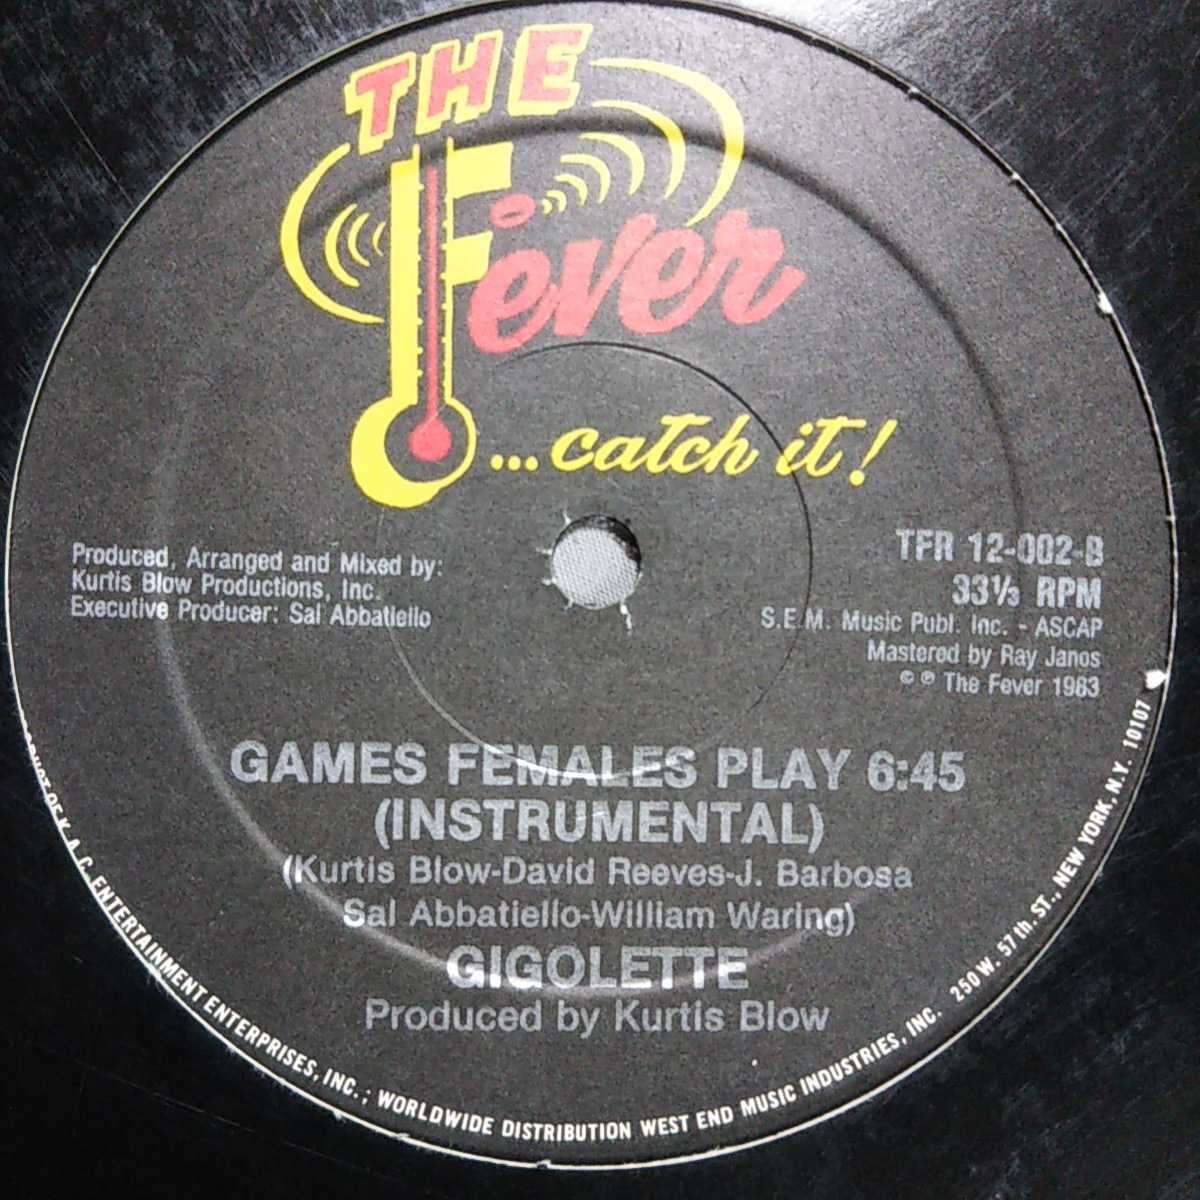 GIGOLETTE / GAMES FEMALES PLAY /ELECTRO/エレクトロ/SWEET G,GAMES PEOPLE PLAY アンサー ISAAC HAYES,IKE'S MOOD ネタ_画像2